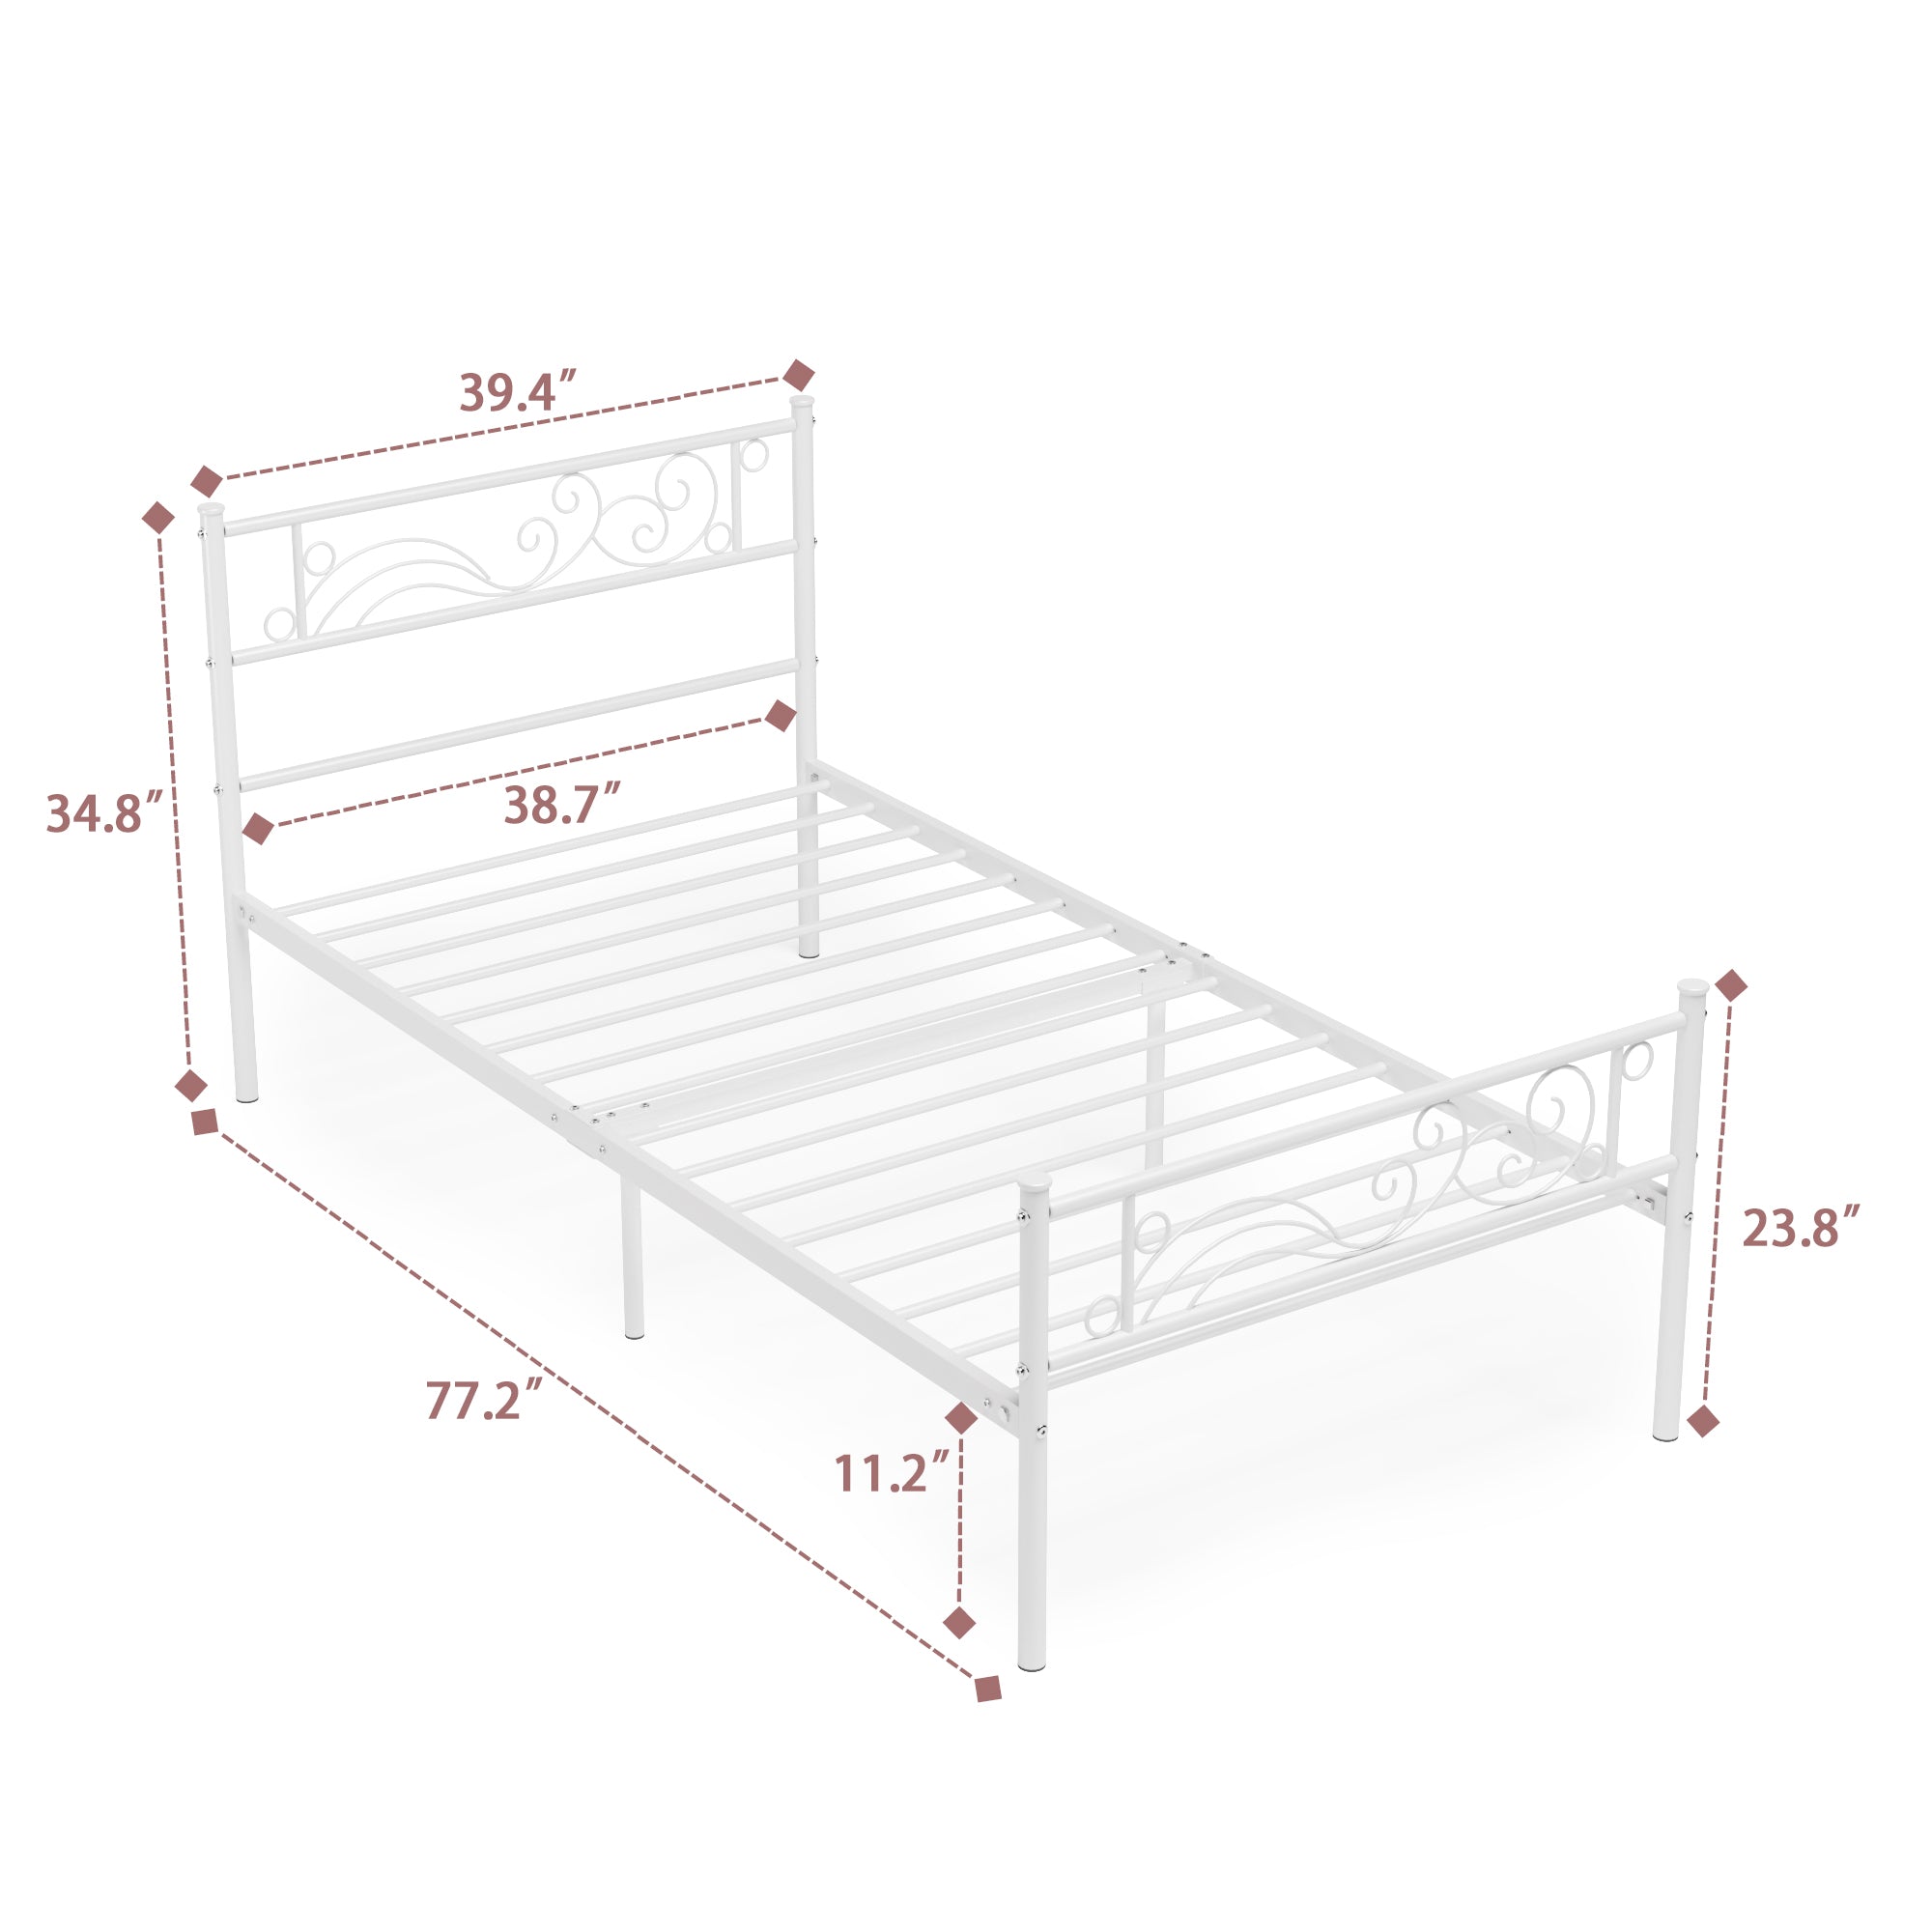 Weehom Twin Metal Bed Frame with Headboard Footboard, Platform Bed Frame Heavy Duty Mattress Foundation for Kids Teens Adults, White